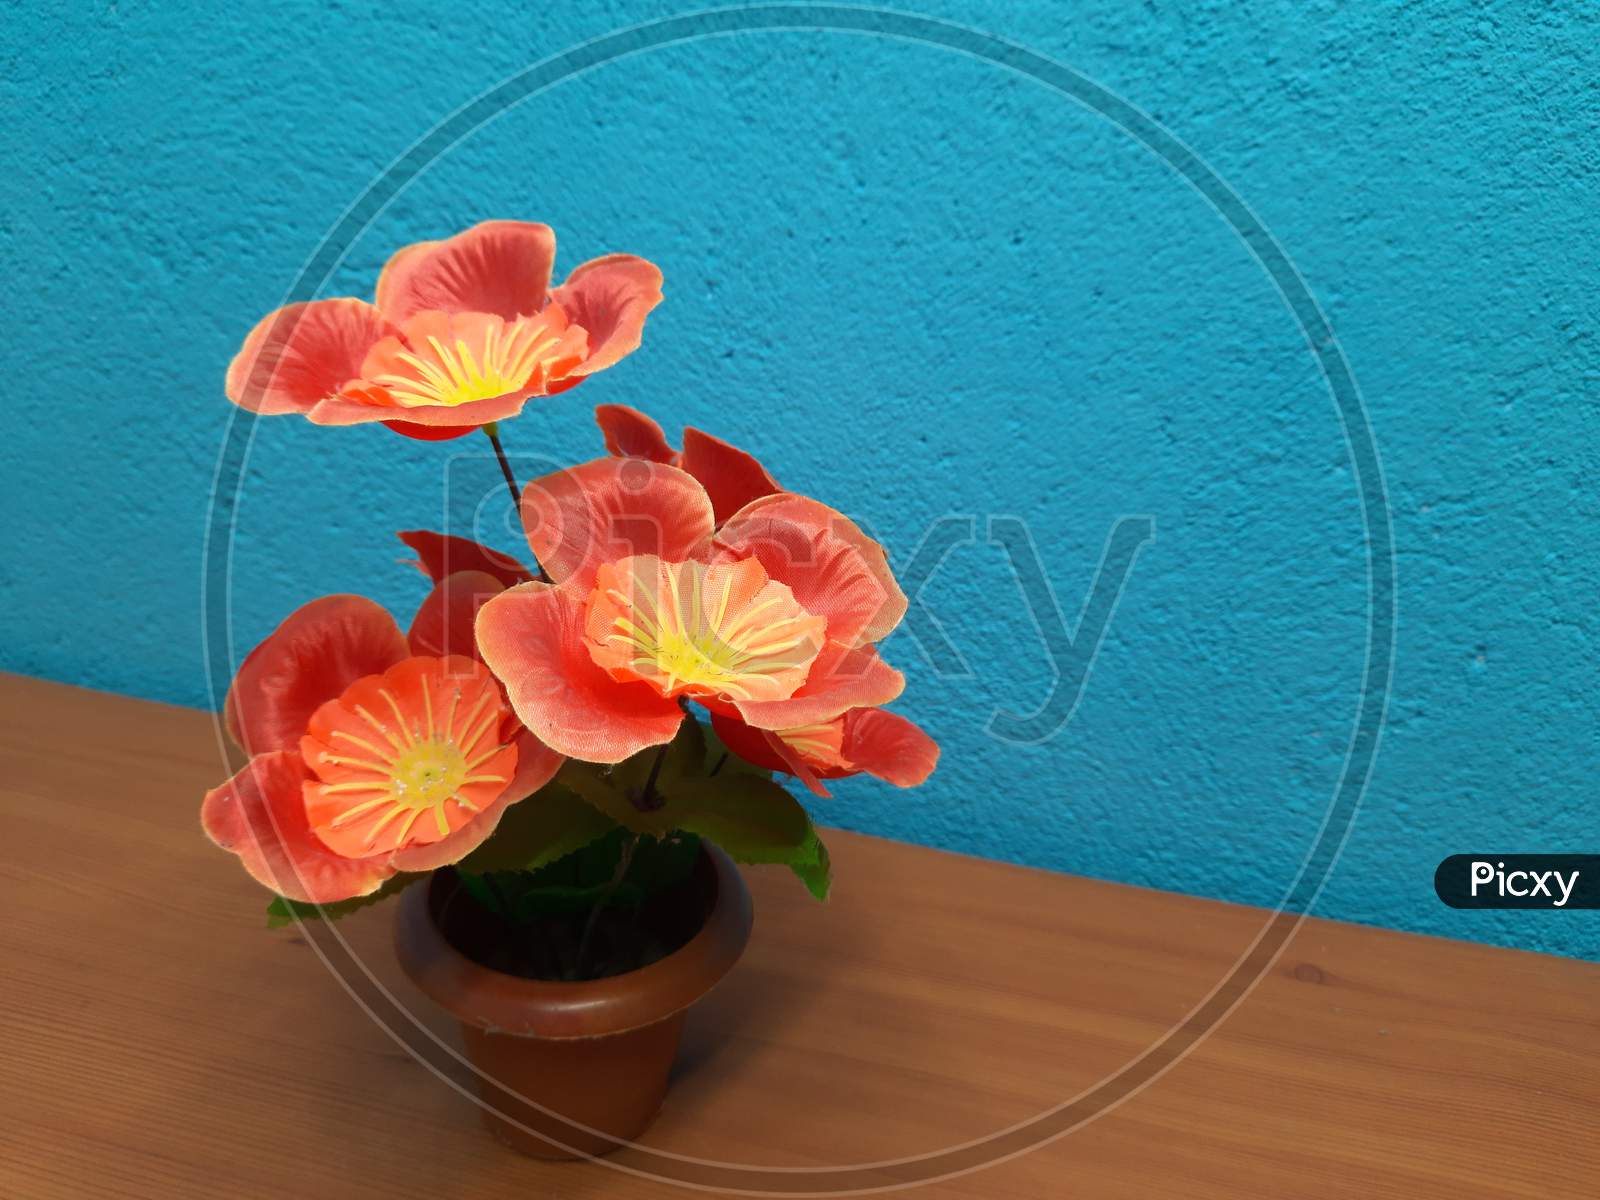 Red flowers image in top,Background Blur, flower image